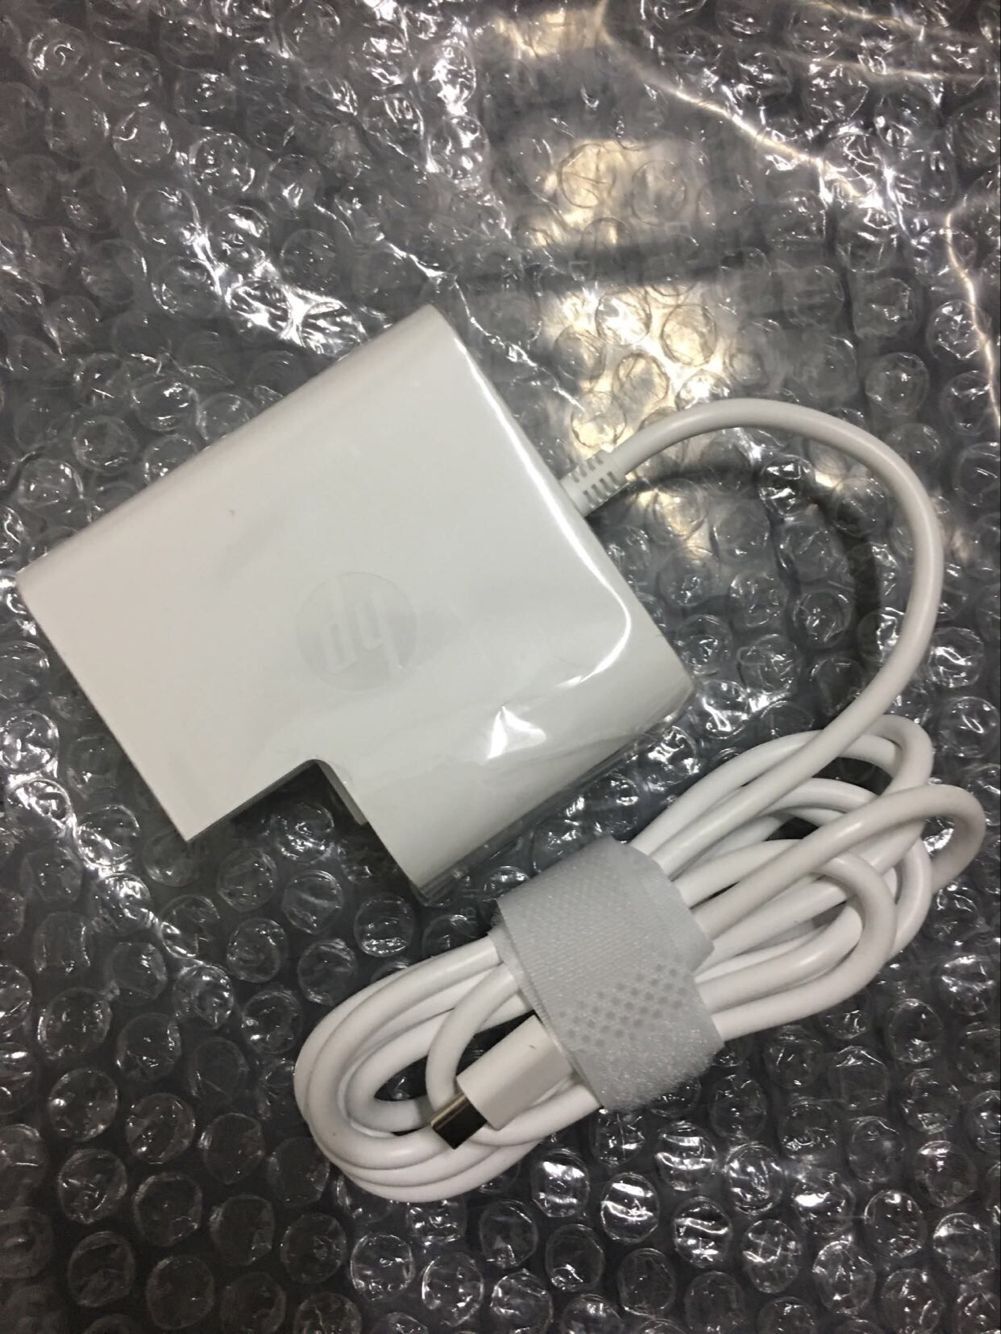 Original 65W HP Spectre x360 13-ae021tu USB-C AC Power Adapter Charger - Click Image to Close